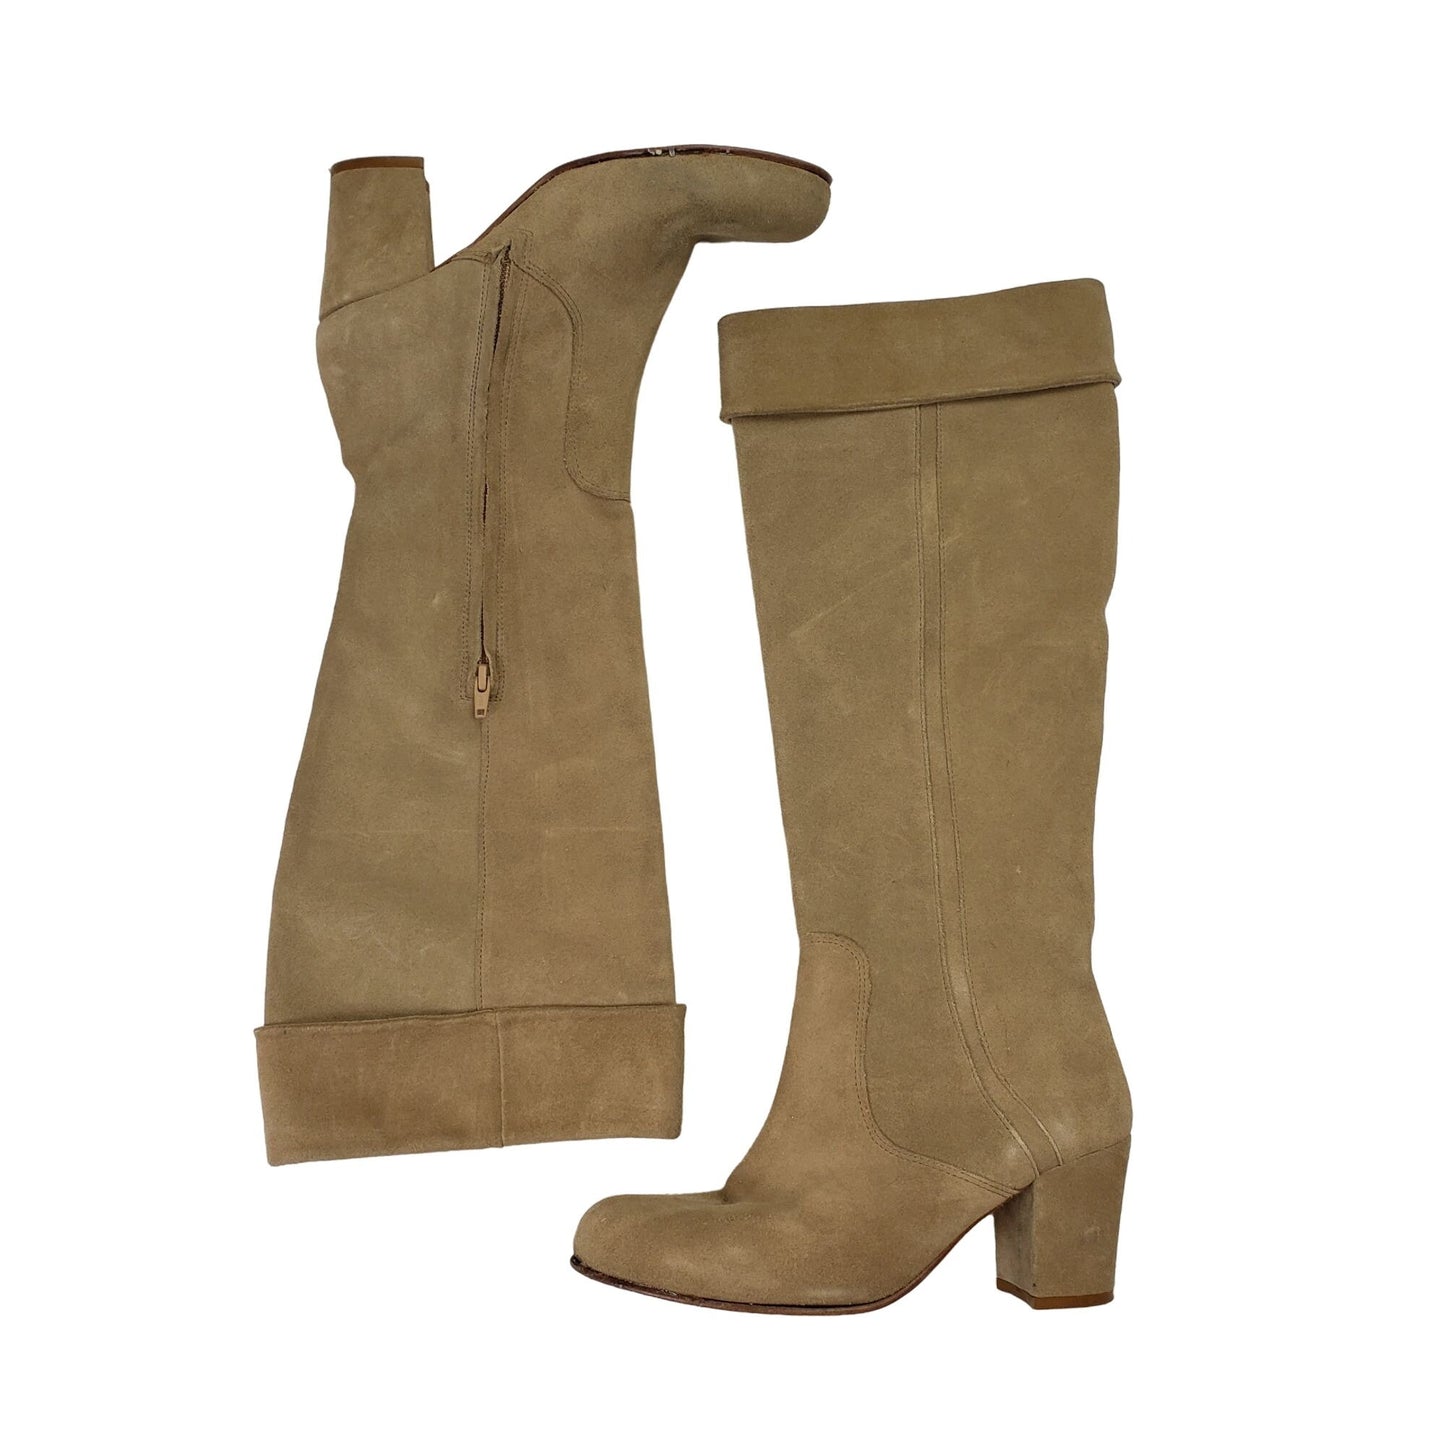 Agnes B. Suede Leather Knee Boots Size EU 38/US 8